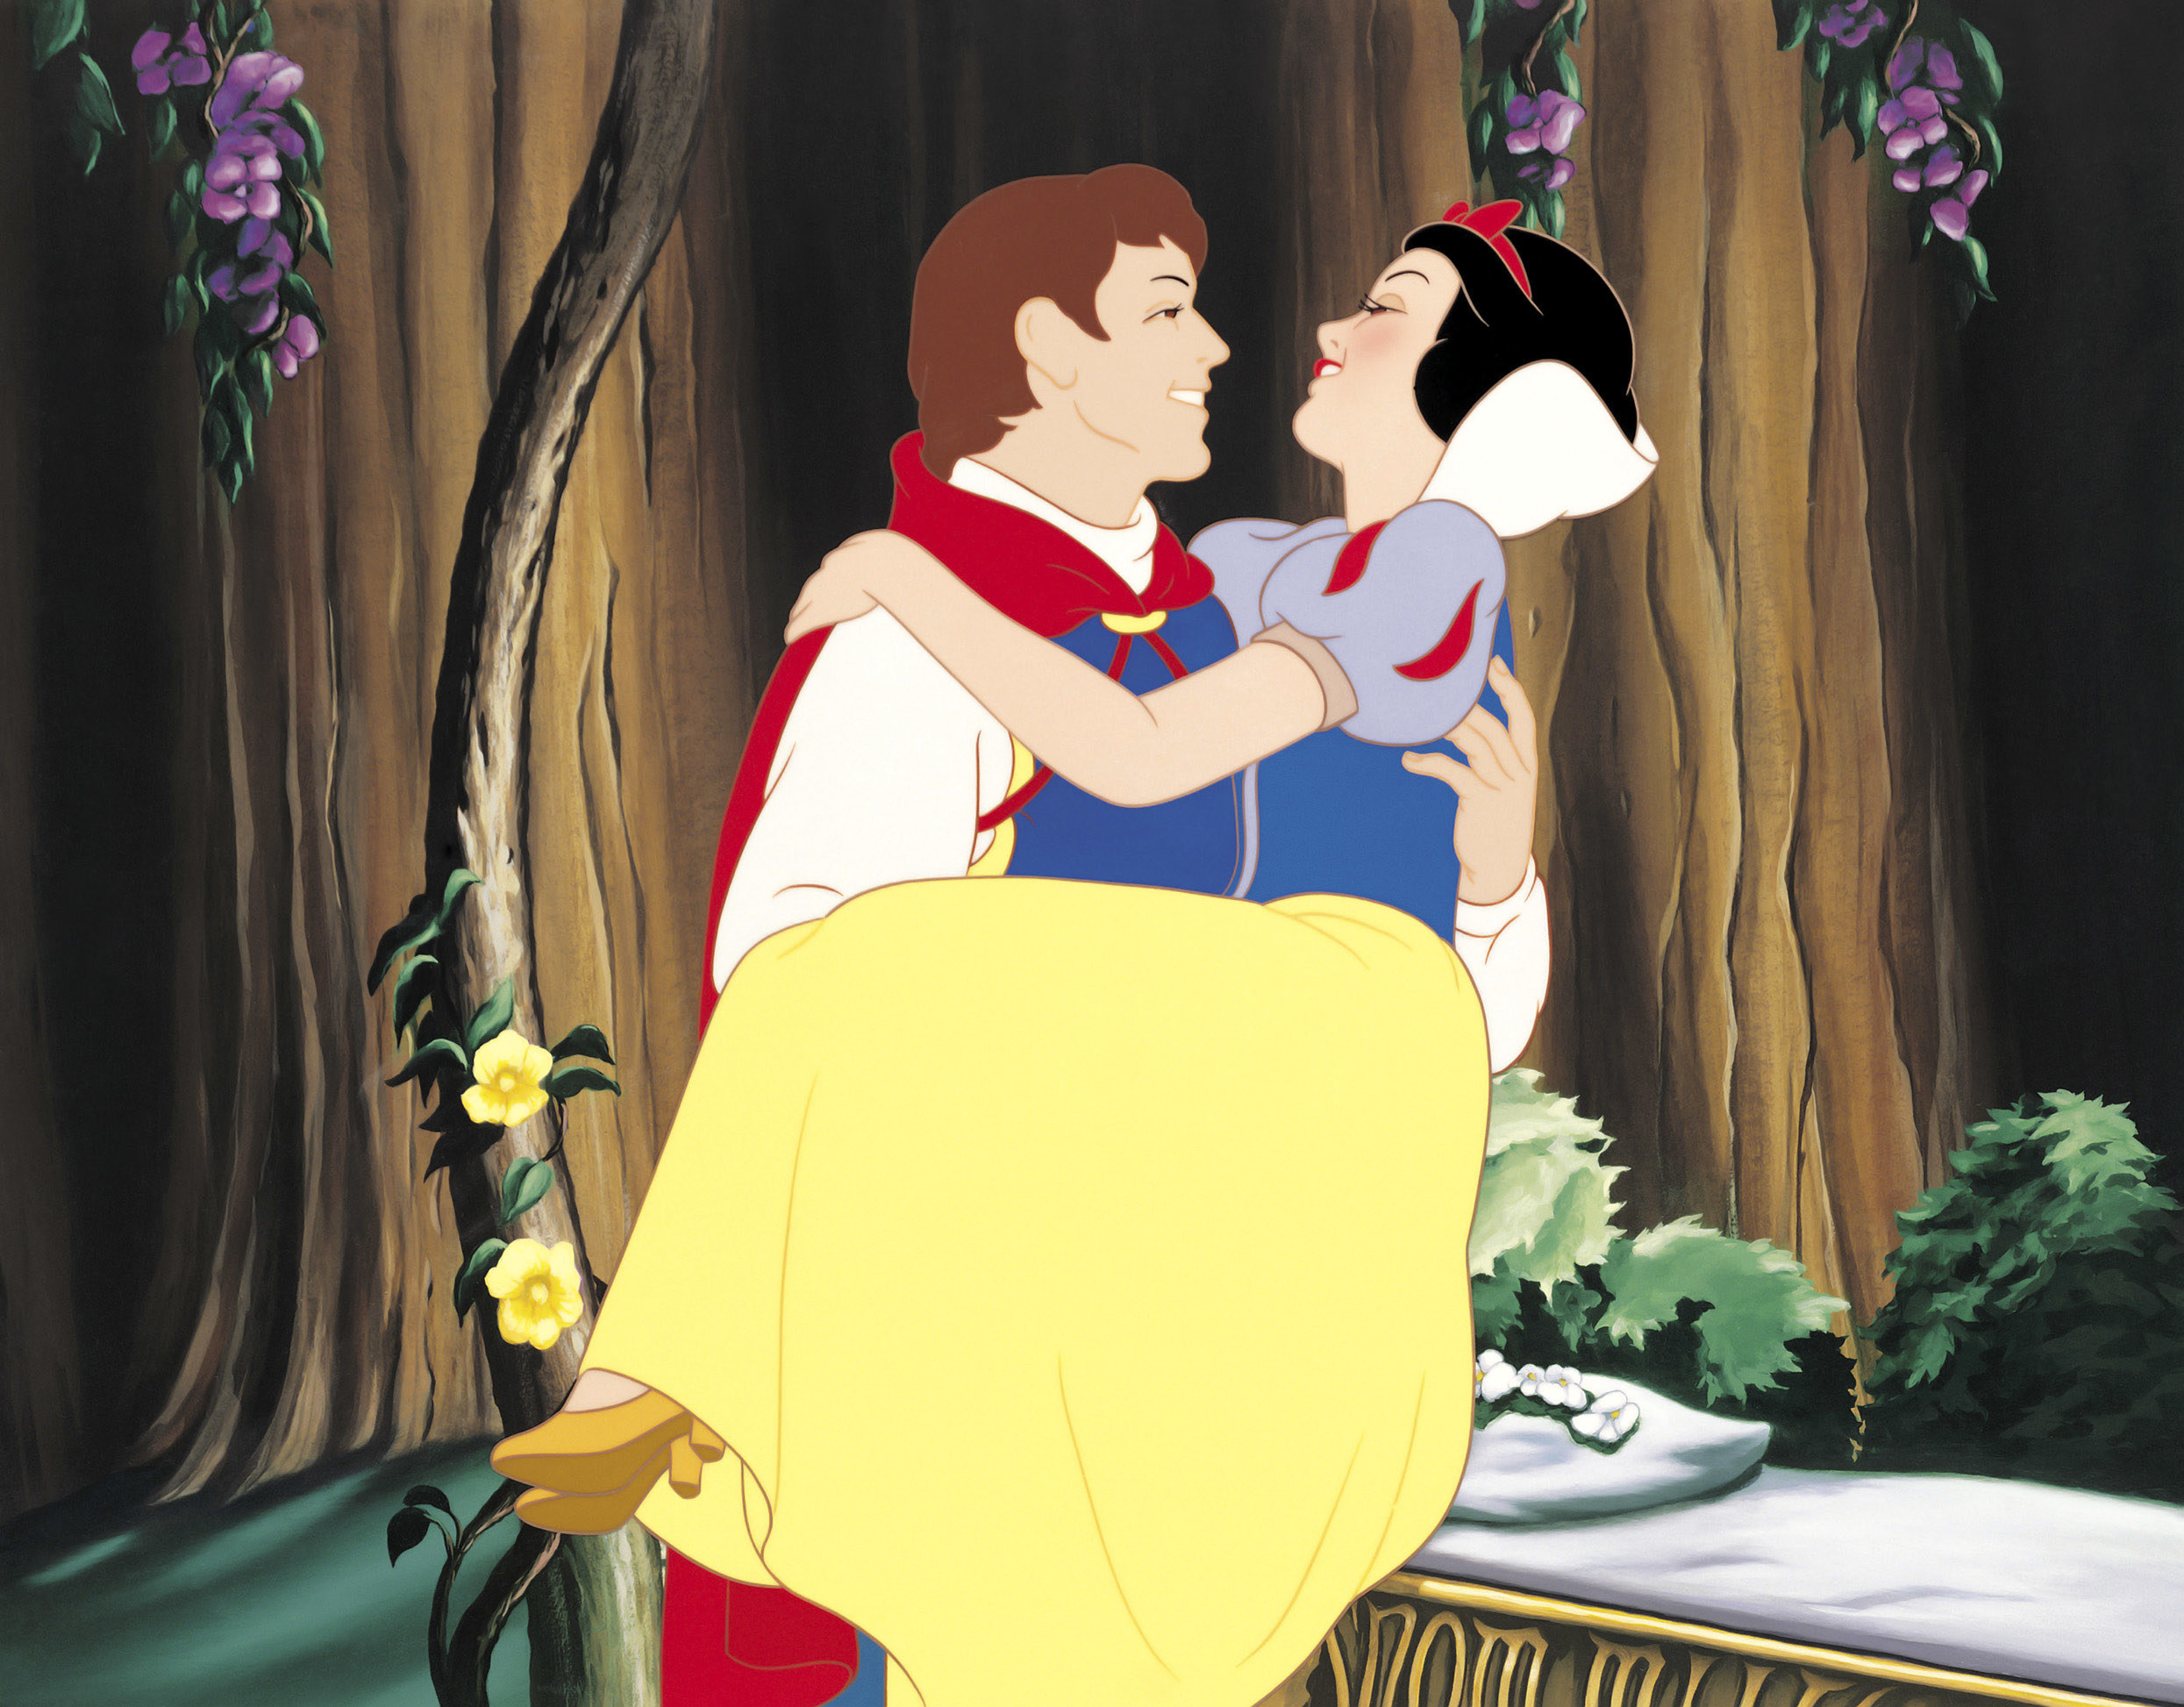 The prince carrying Snow White in his arms after waking her with a kiss